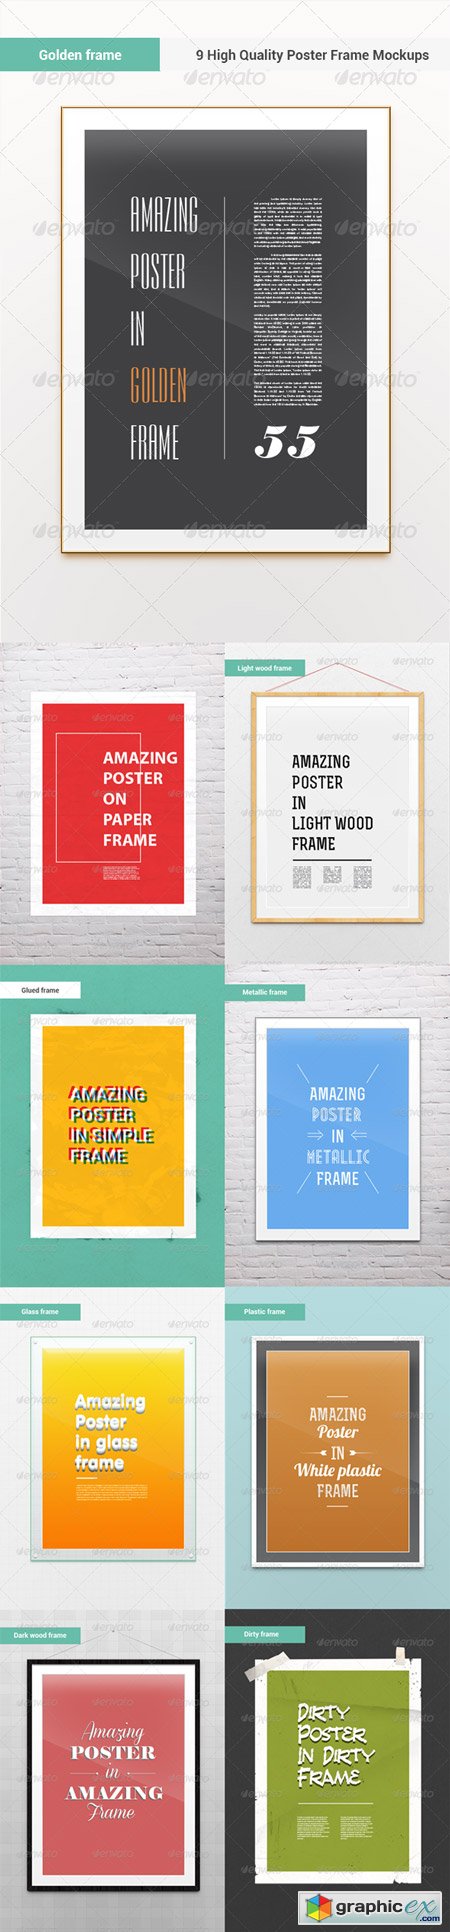 9 High Quality Picture Poster Frame Mock-Ups